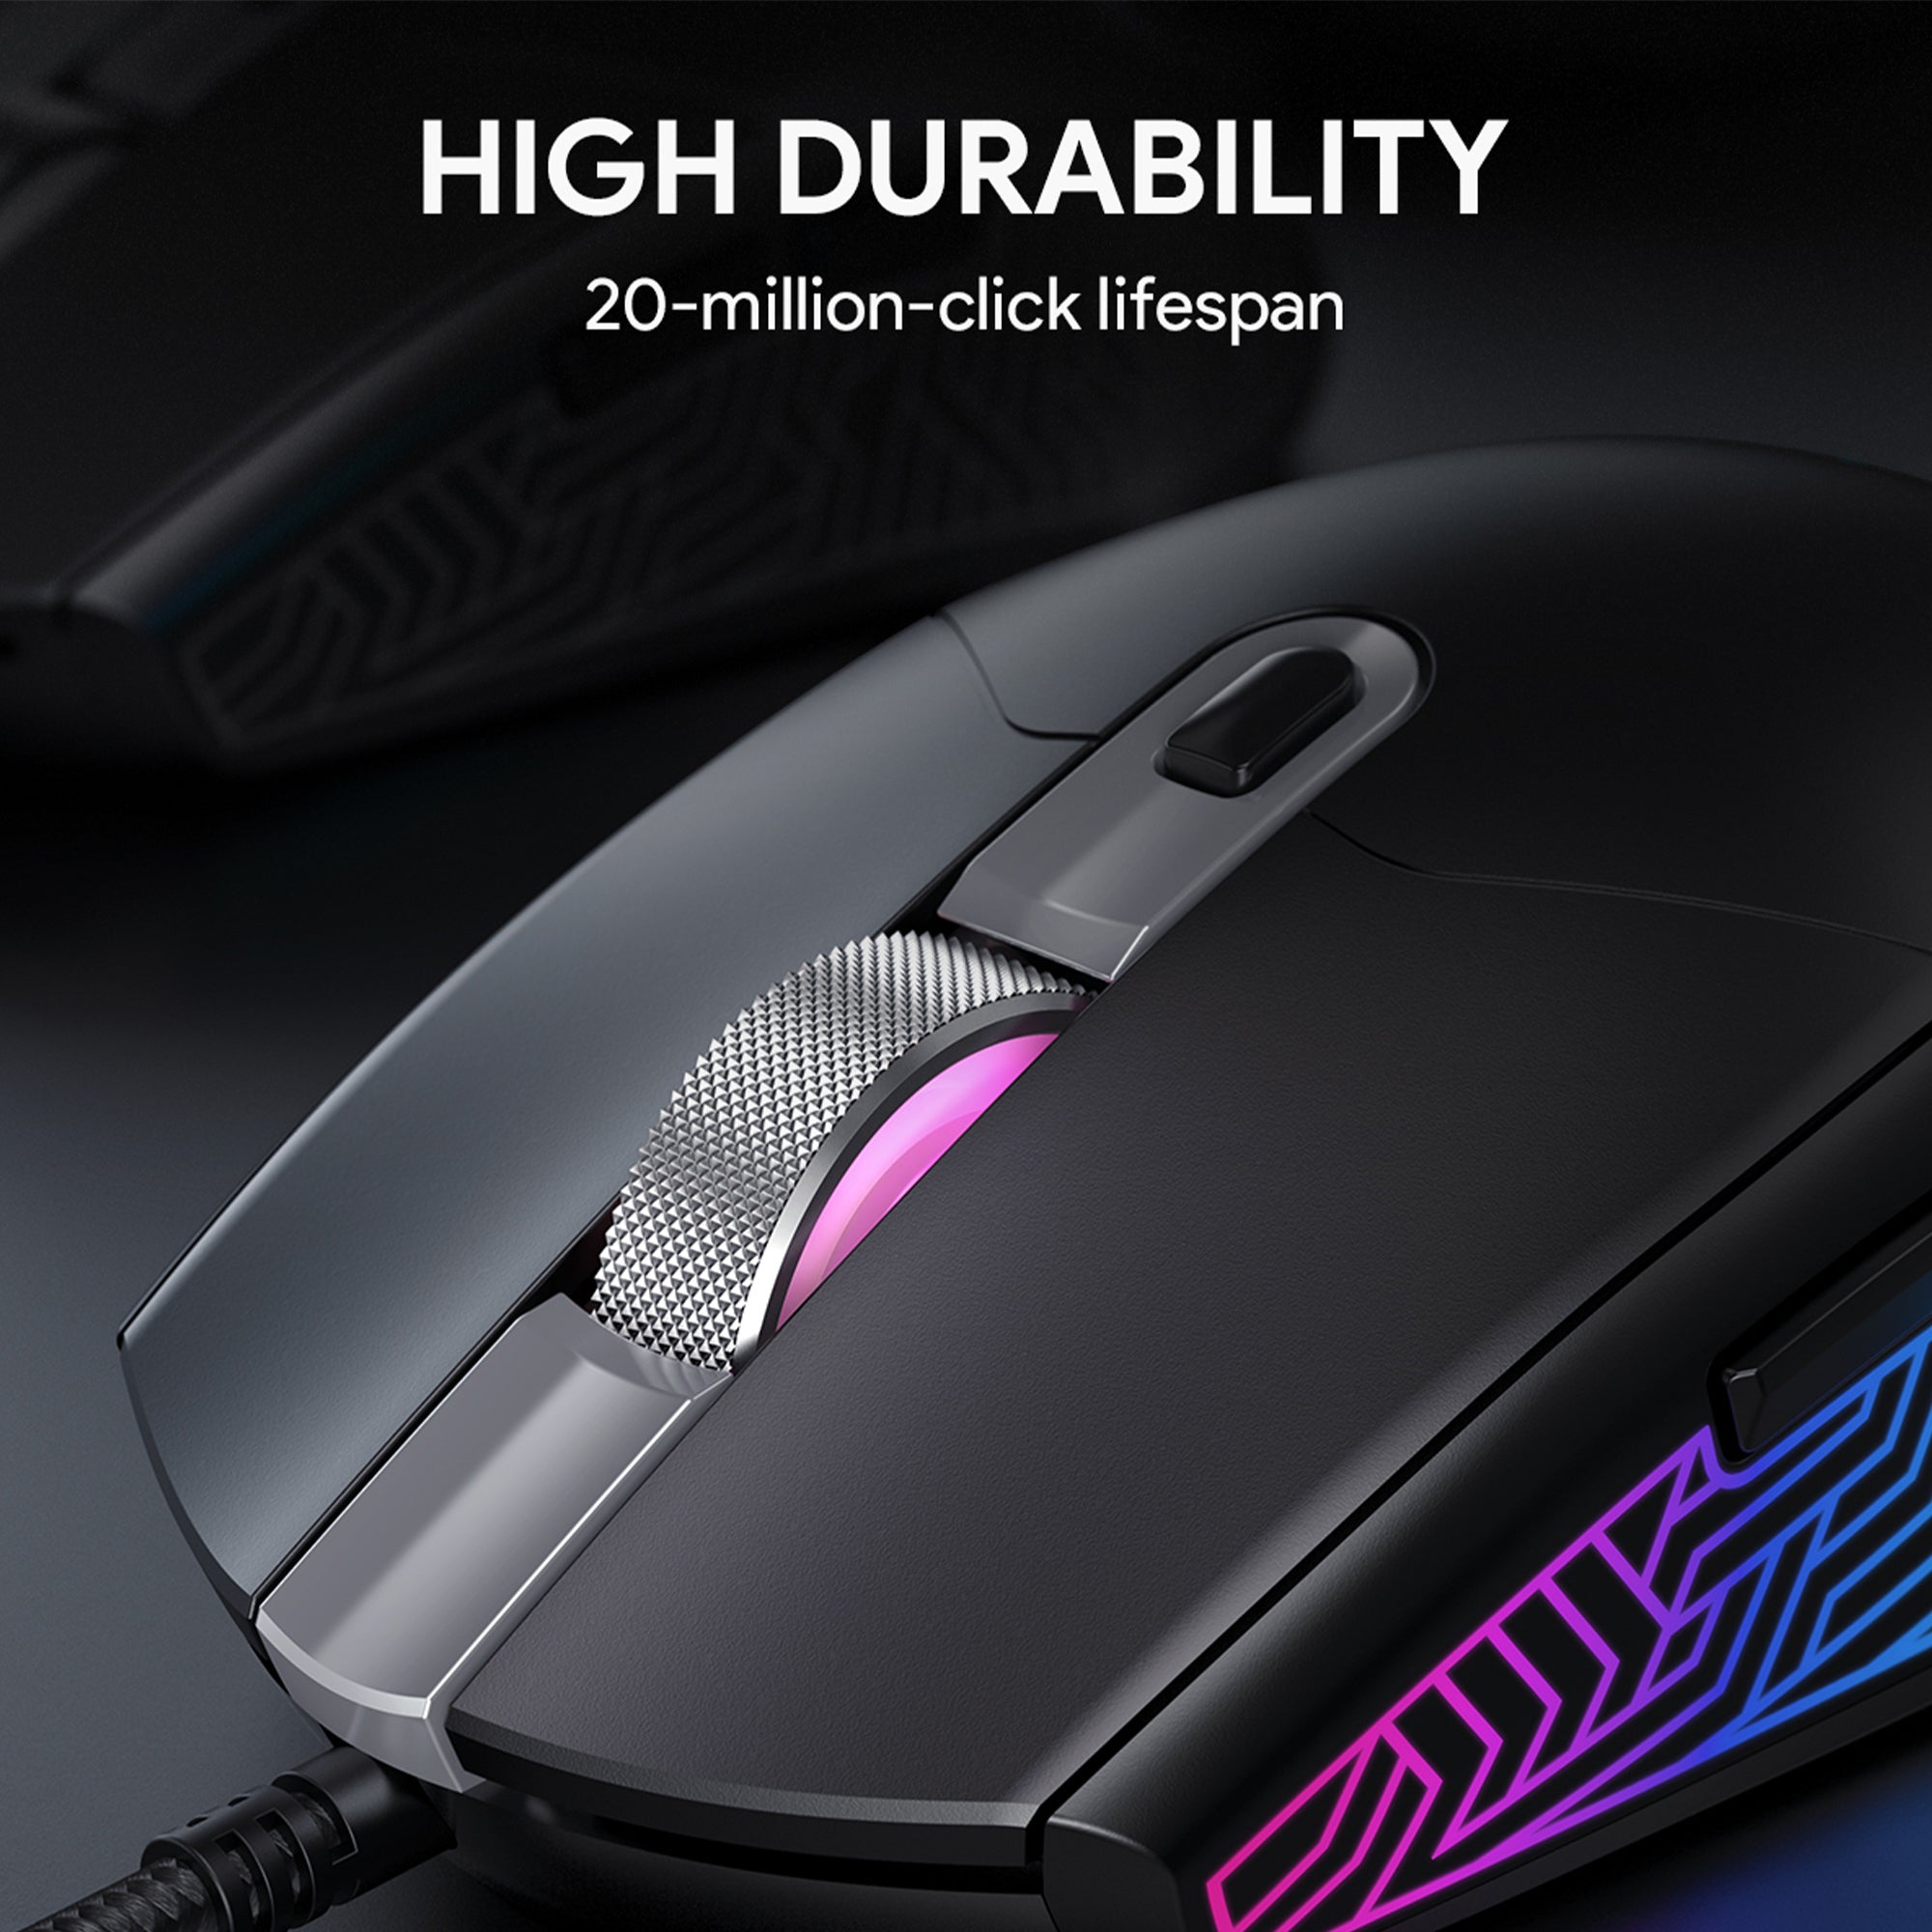 GM-F3 RGB Wired Gaming Mouse with 7200 DPI Optical Sensor, 6 Programmable Buttons, Lightweight Design, and Macros